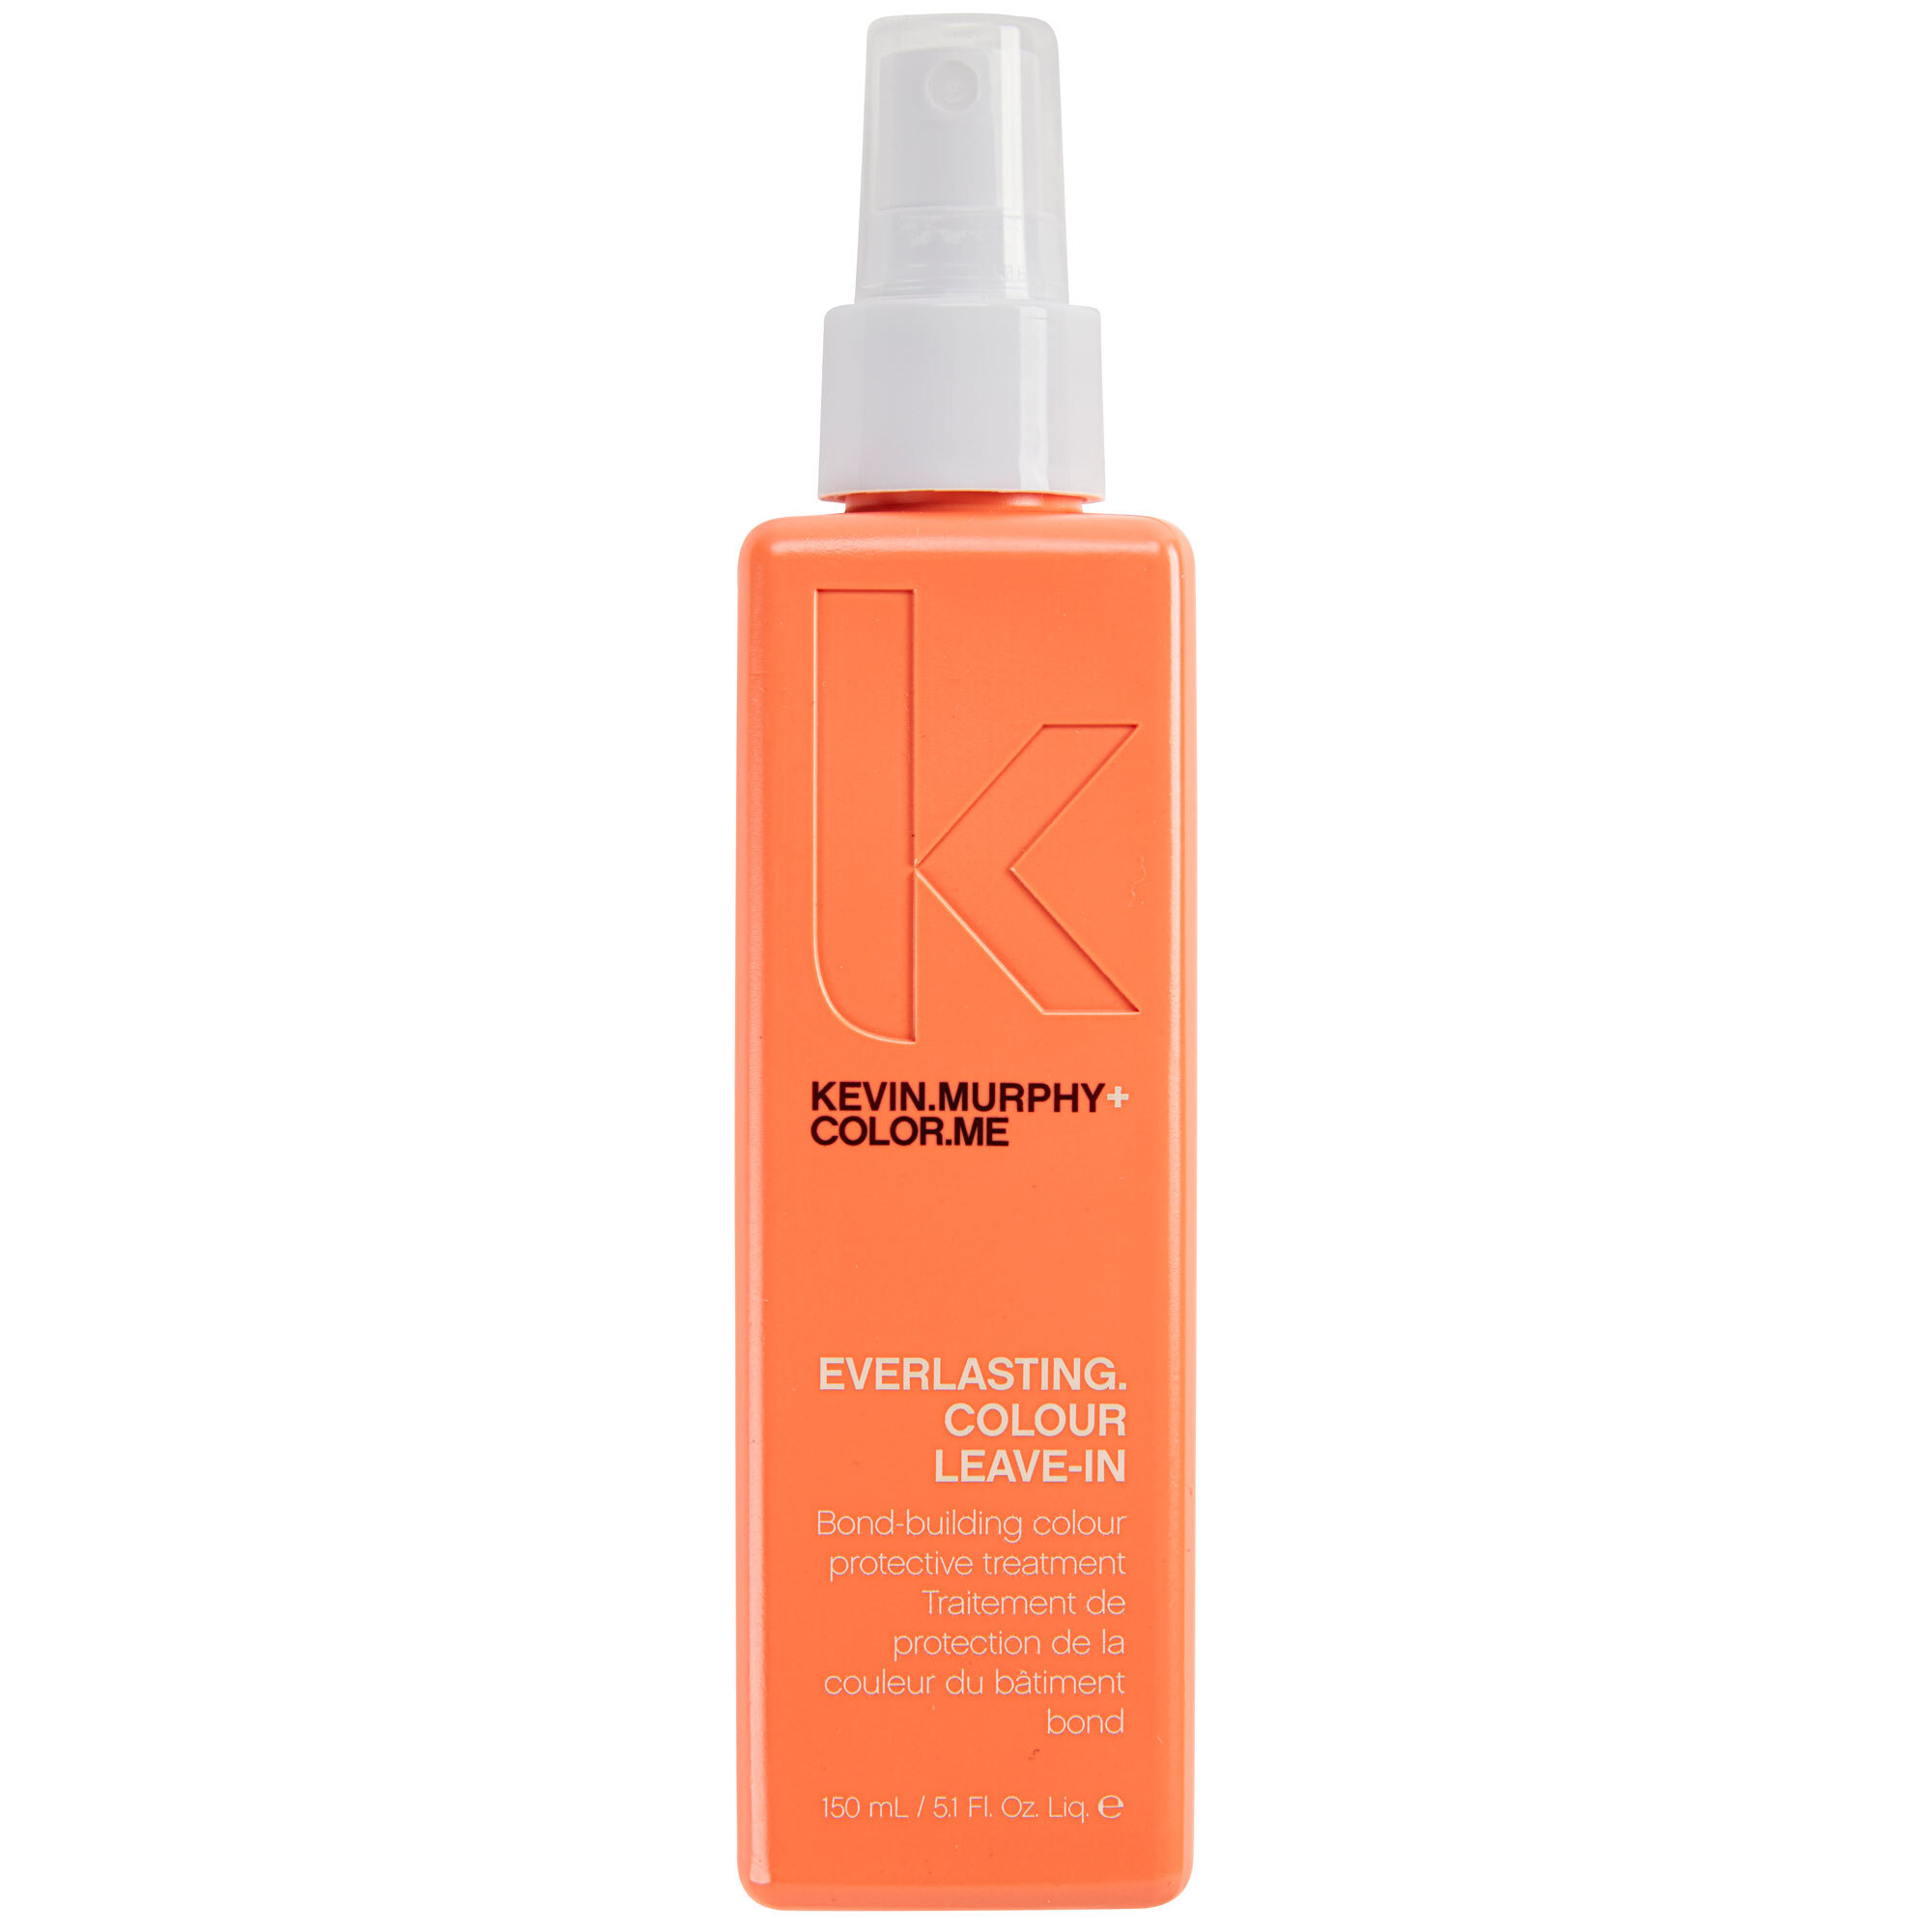 KEVIN.MURPHY EVERLASTING.COLOUR Leave-In 5.1oz